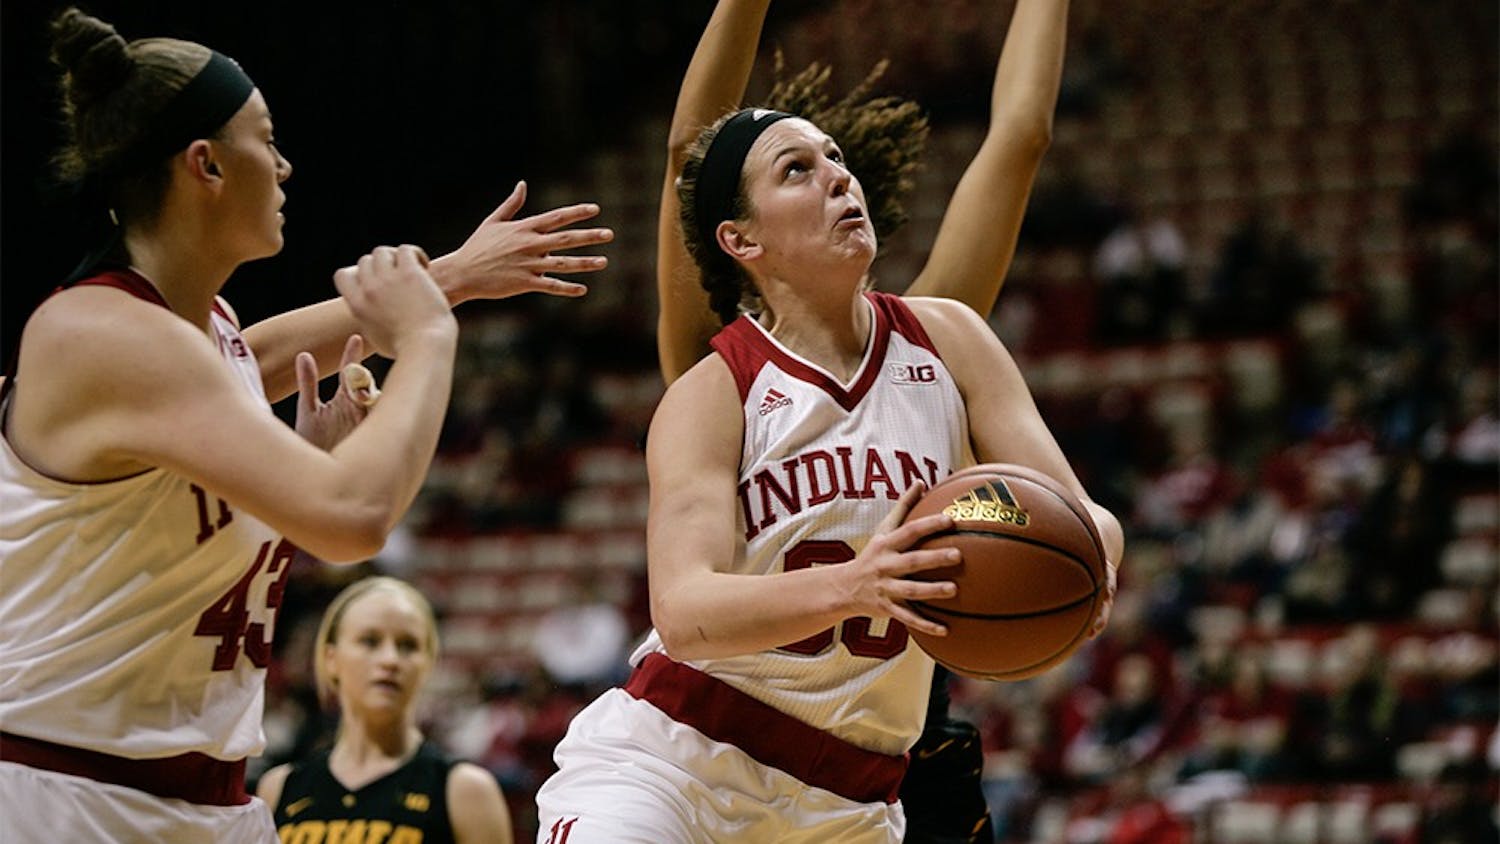 Sophomore forward Amanda Cahill jumps towards the basket in an attempt to score. Cahill led in scoring against the Hawkeyes, putting up 24 points to help the Hoosiers win 79-74 on Thursday night at Assembly Hall.